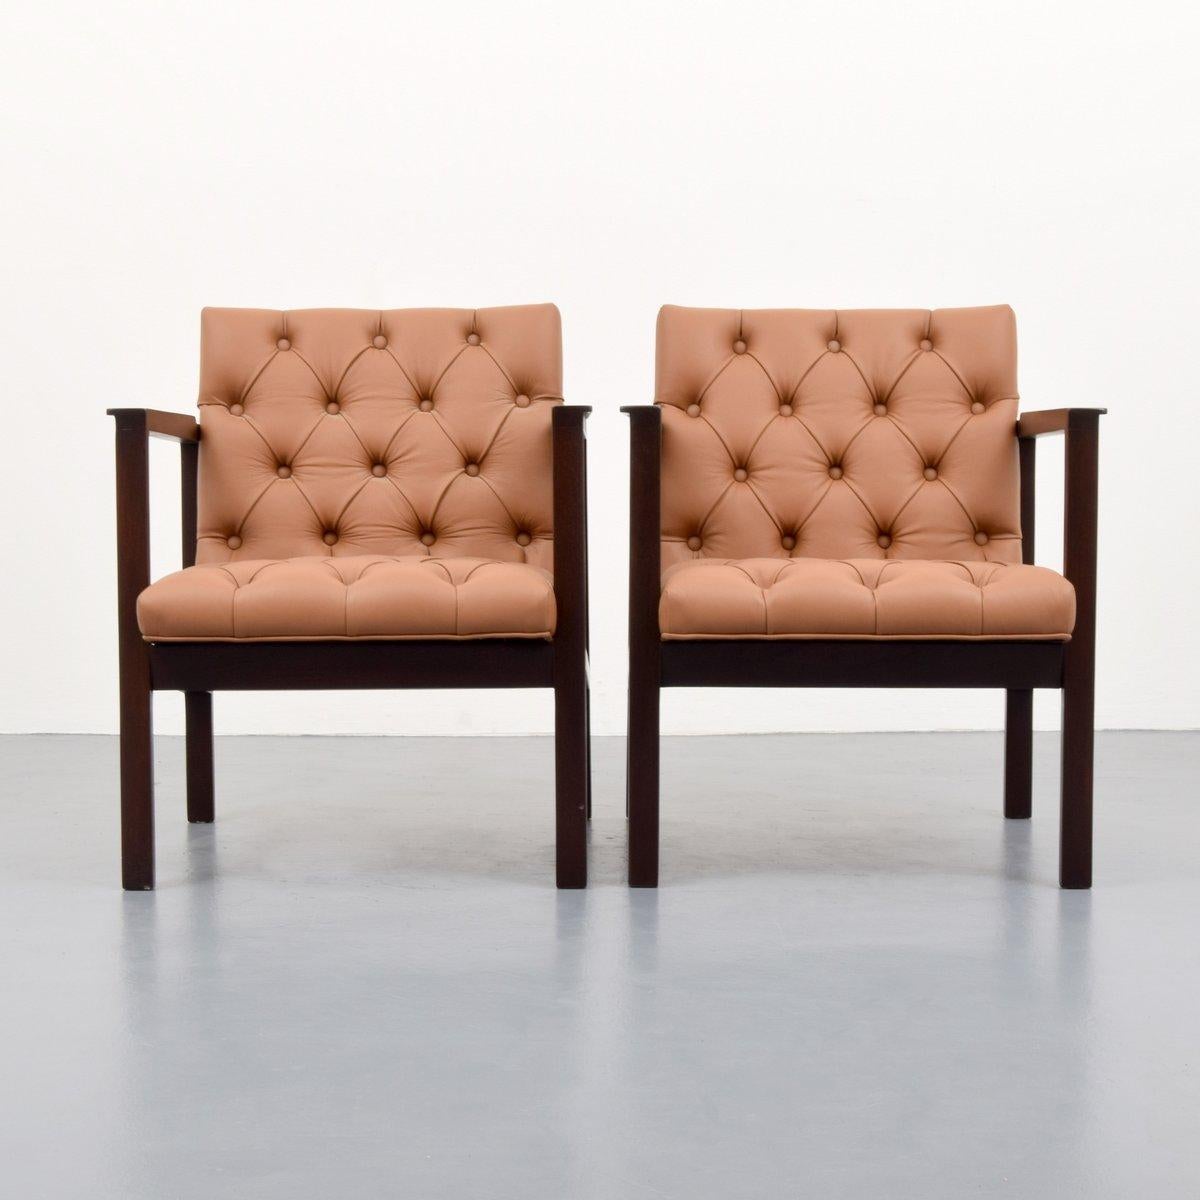 Pair of lounge/armchairs by Edward Wormley. Chairs are model 406.